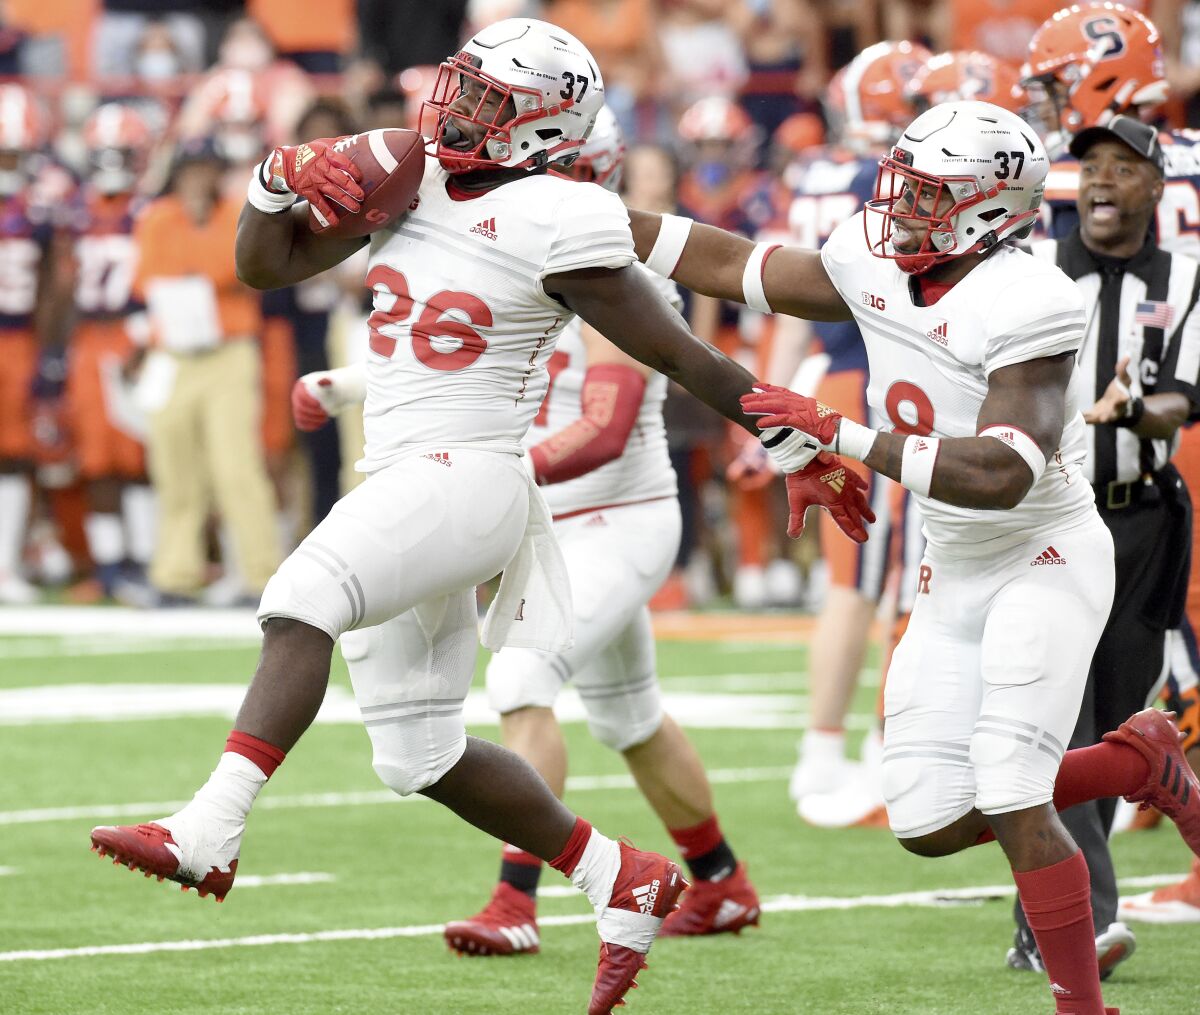 Rutgers defensive lineman CJ Onyechi (26) recovers a fumble in the fourth quarter of an NCAA college football game against Syracuse, Saturday, Sept. 11, 2021, at the Carrier Dome in Syracuse, N.Y. (Dennis Nett/The Post-Standard via AP)